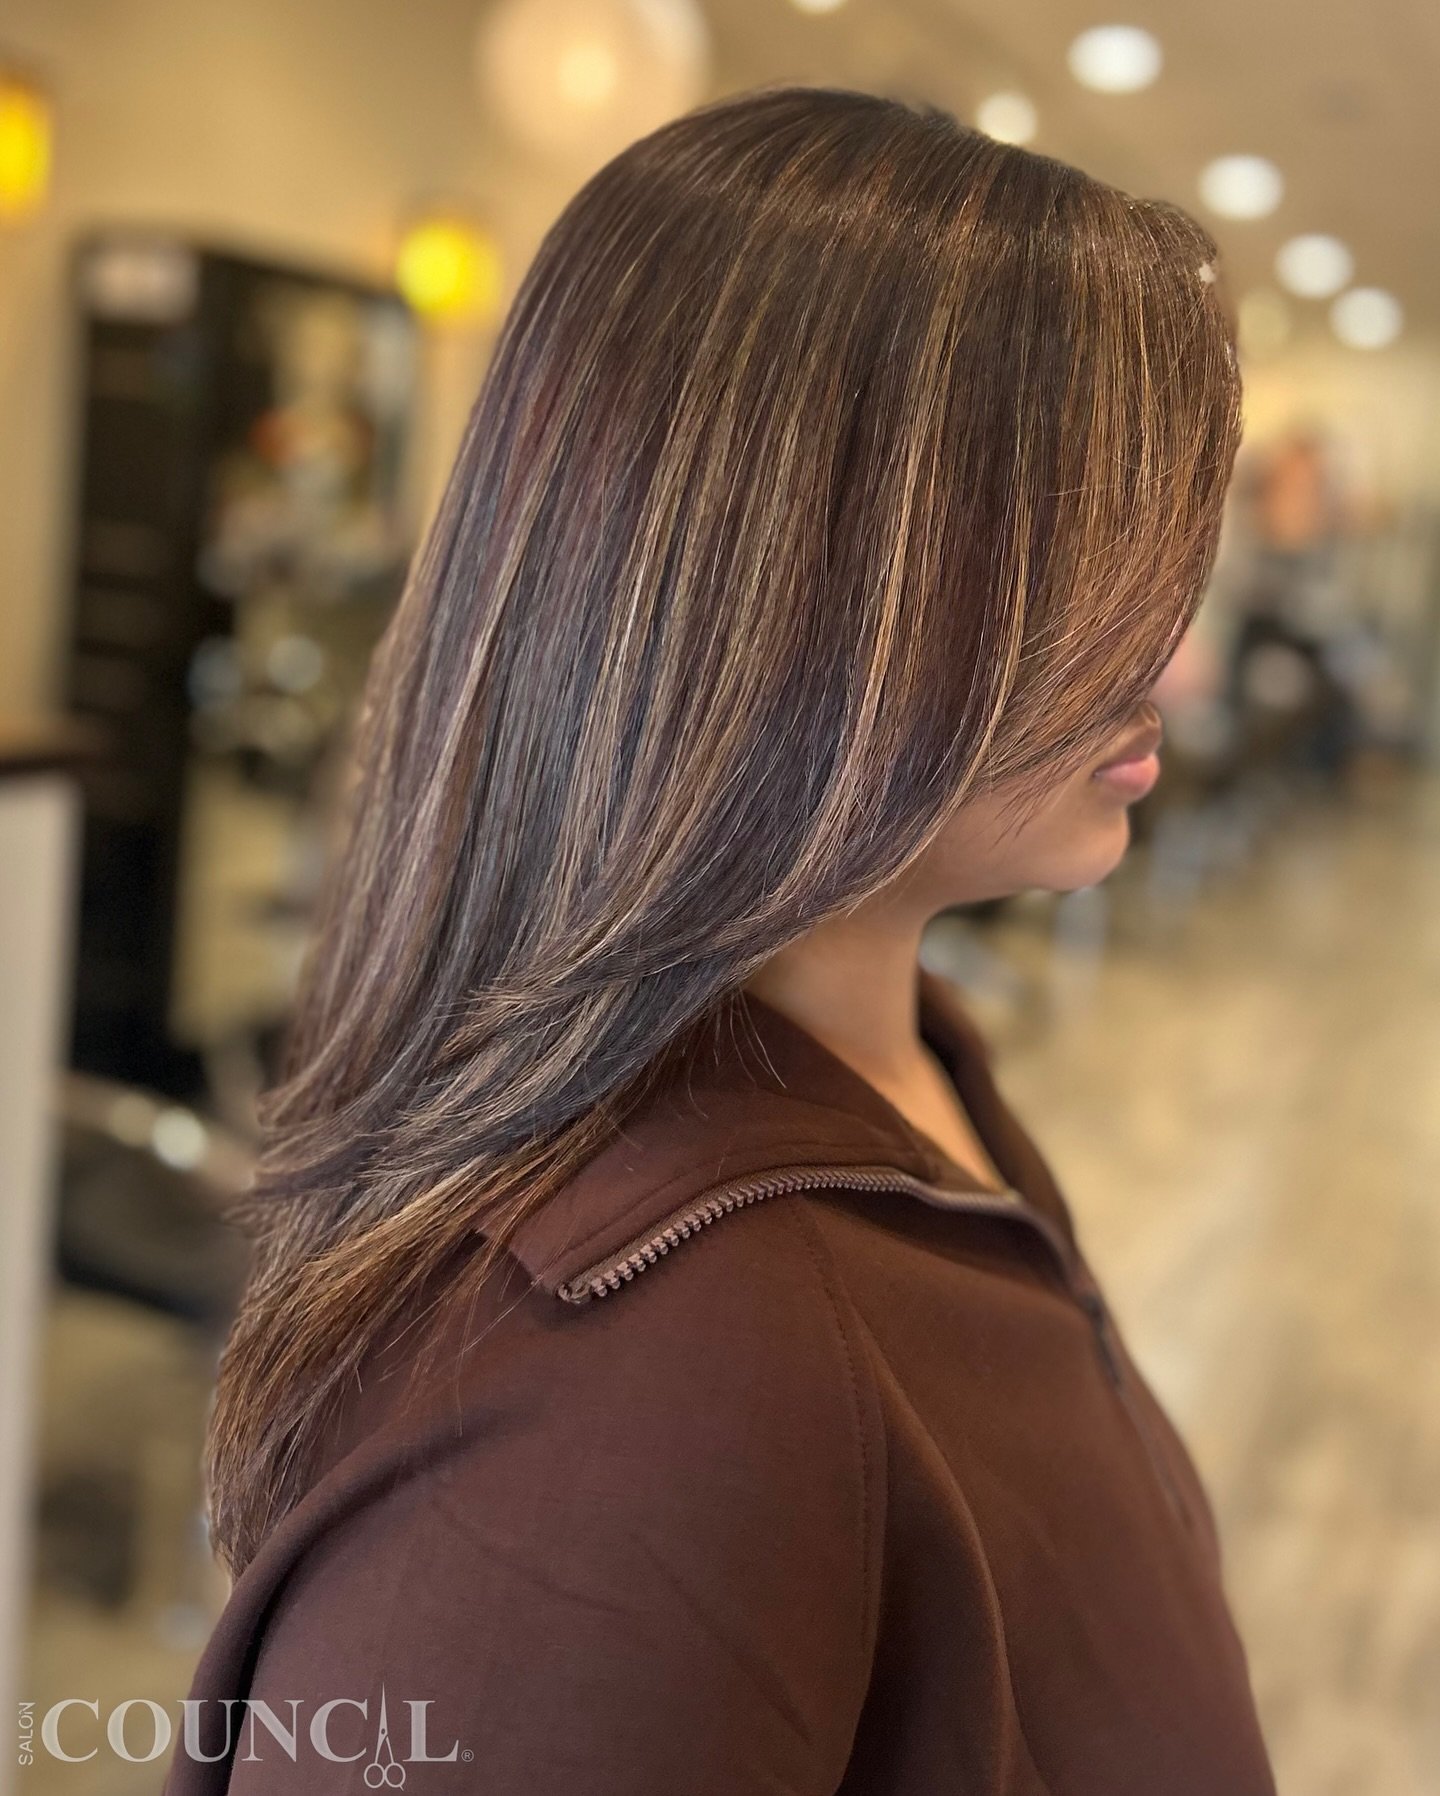 🎉#brandybalayage 
Unveiling a gorgeous brandy balayage, enriched with a perfect toner and Olaplex treatment, all tied together with a fresh haircut and blowout style! 🤎
Ready to shine with every strand! #BrandyBalayage #StylishStrands

BALAYAGE &bu